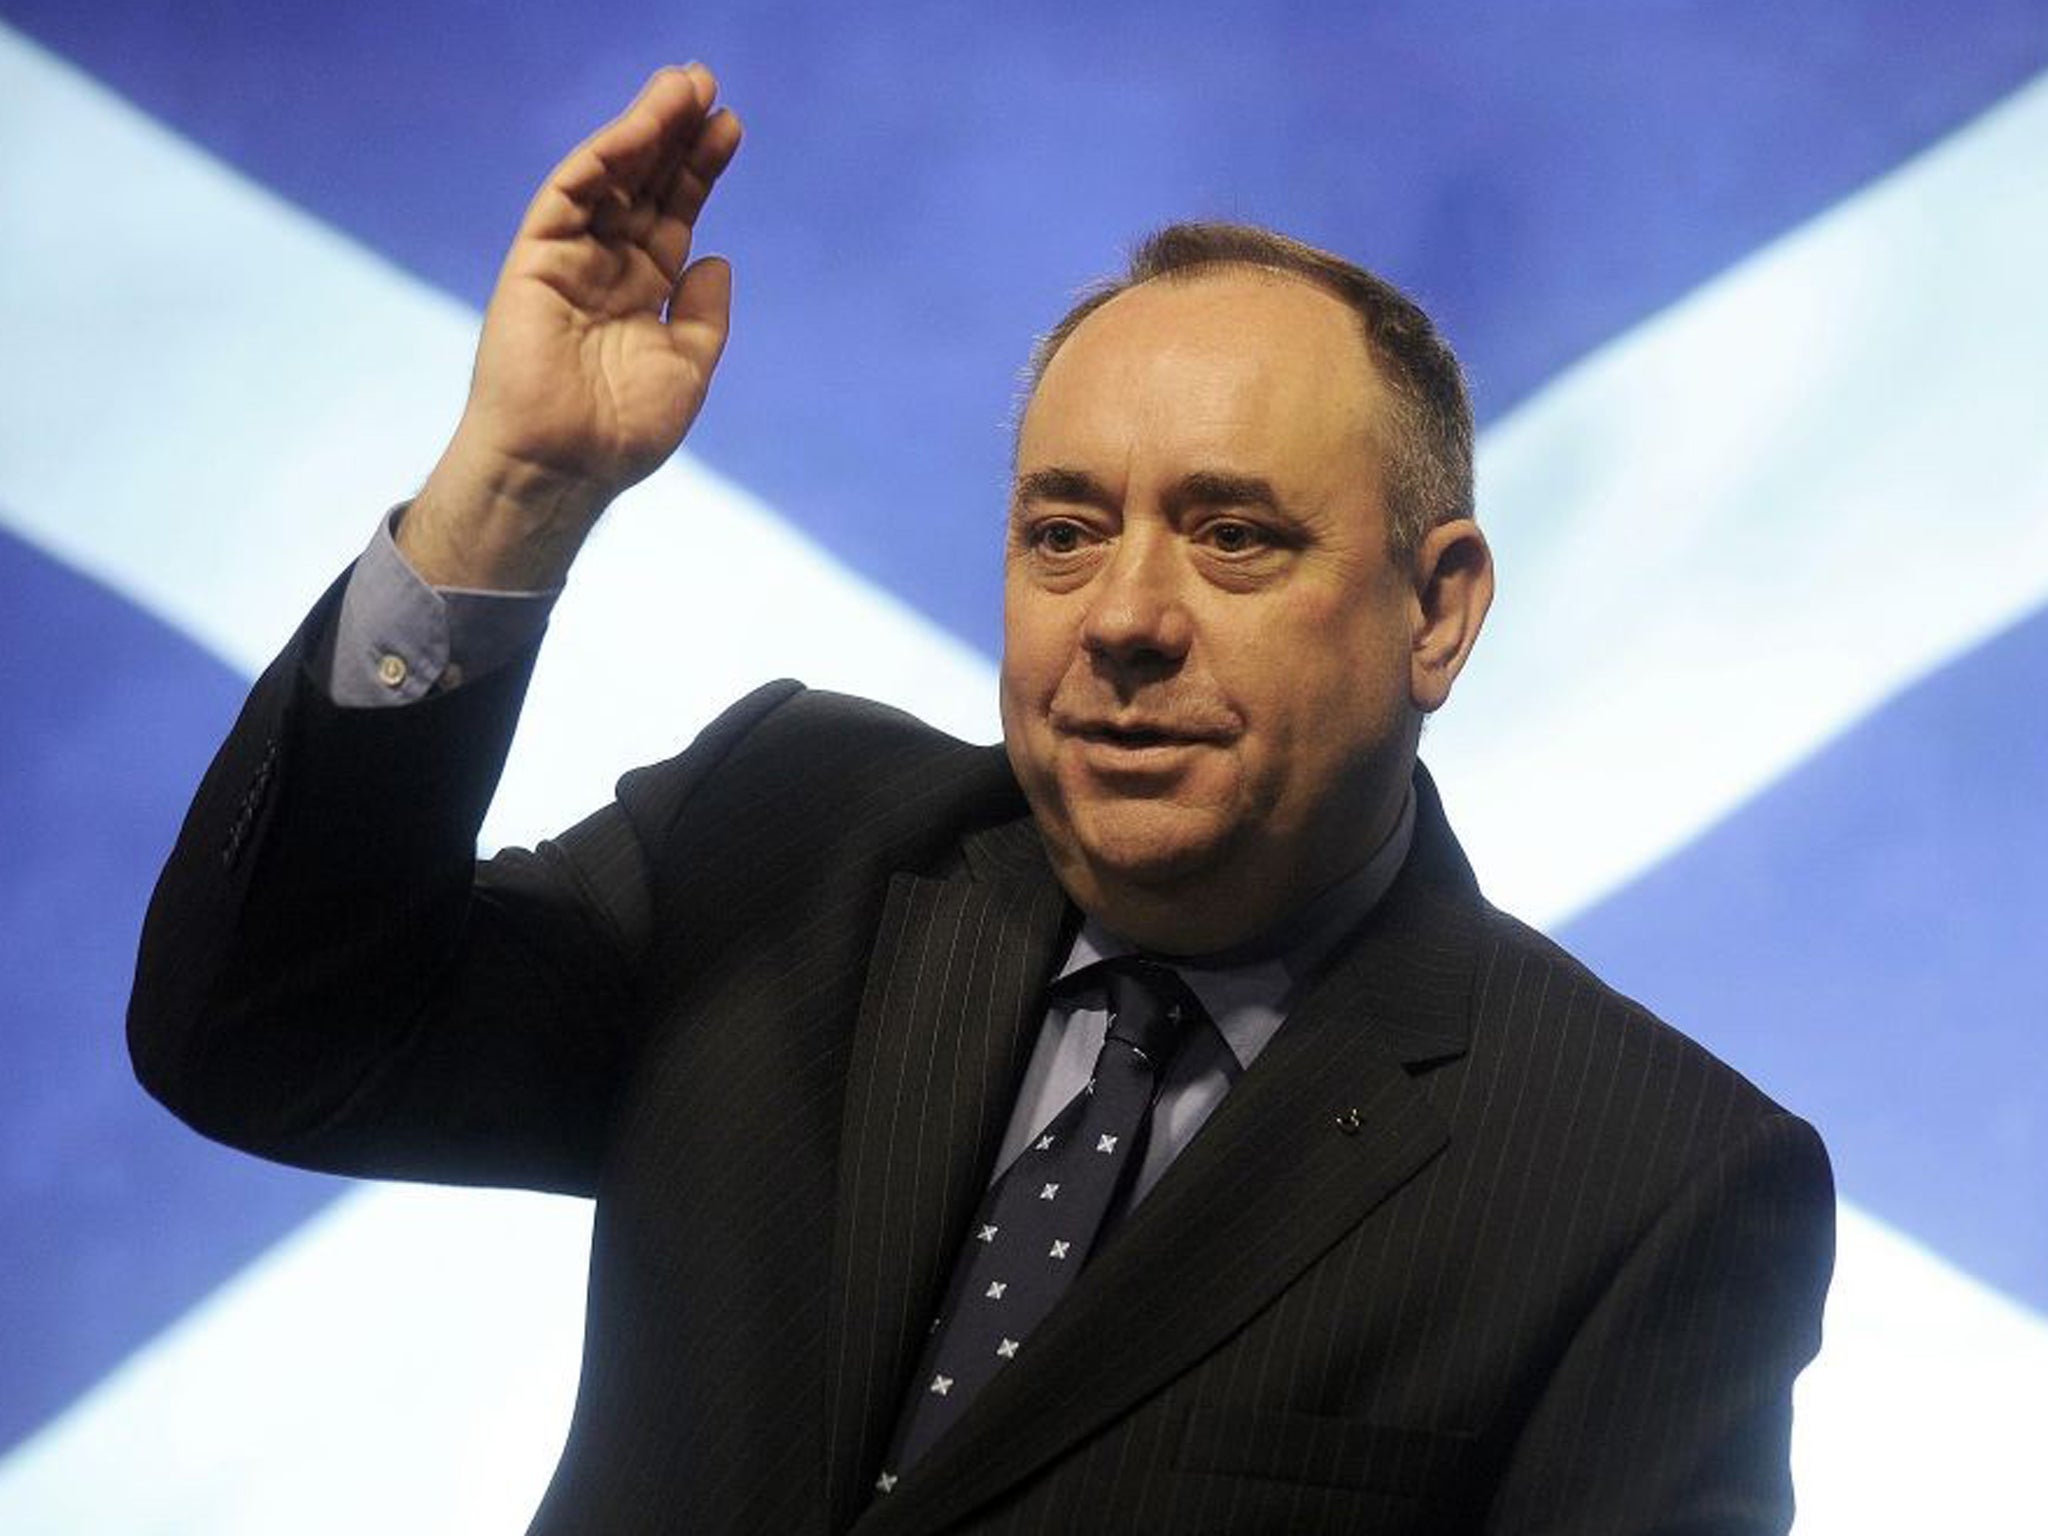 Danny Alexander, the Liberal Democrat Chief Treasury Secretary, has written to Alex Salmond, the First Minister of Scotland (pictured), to warn him about an average £1,000 rise in income tax per person